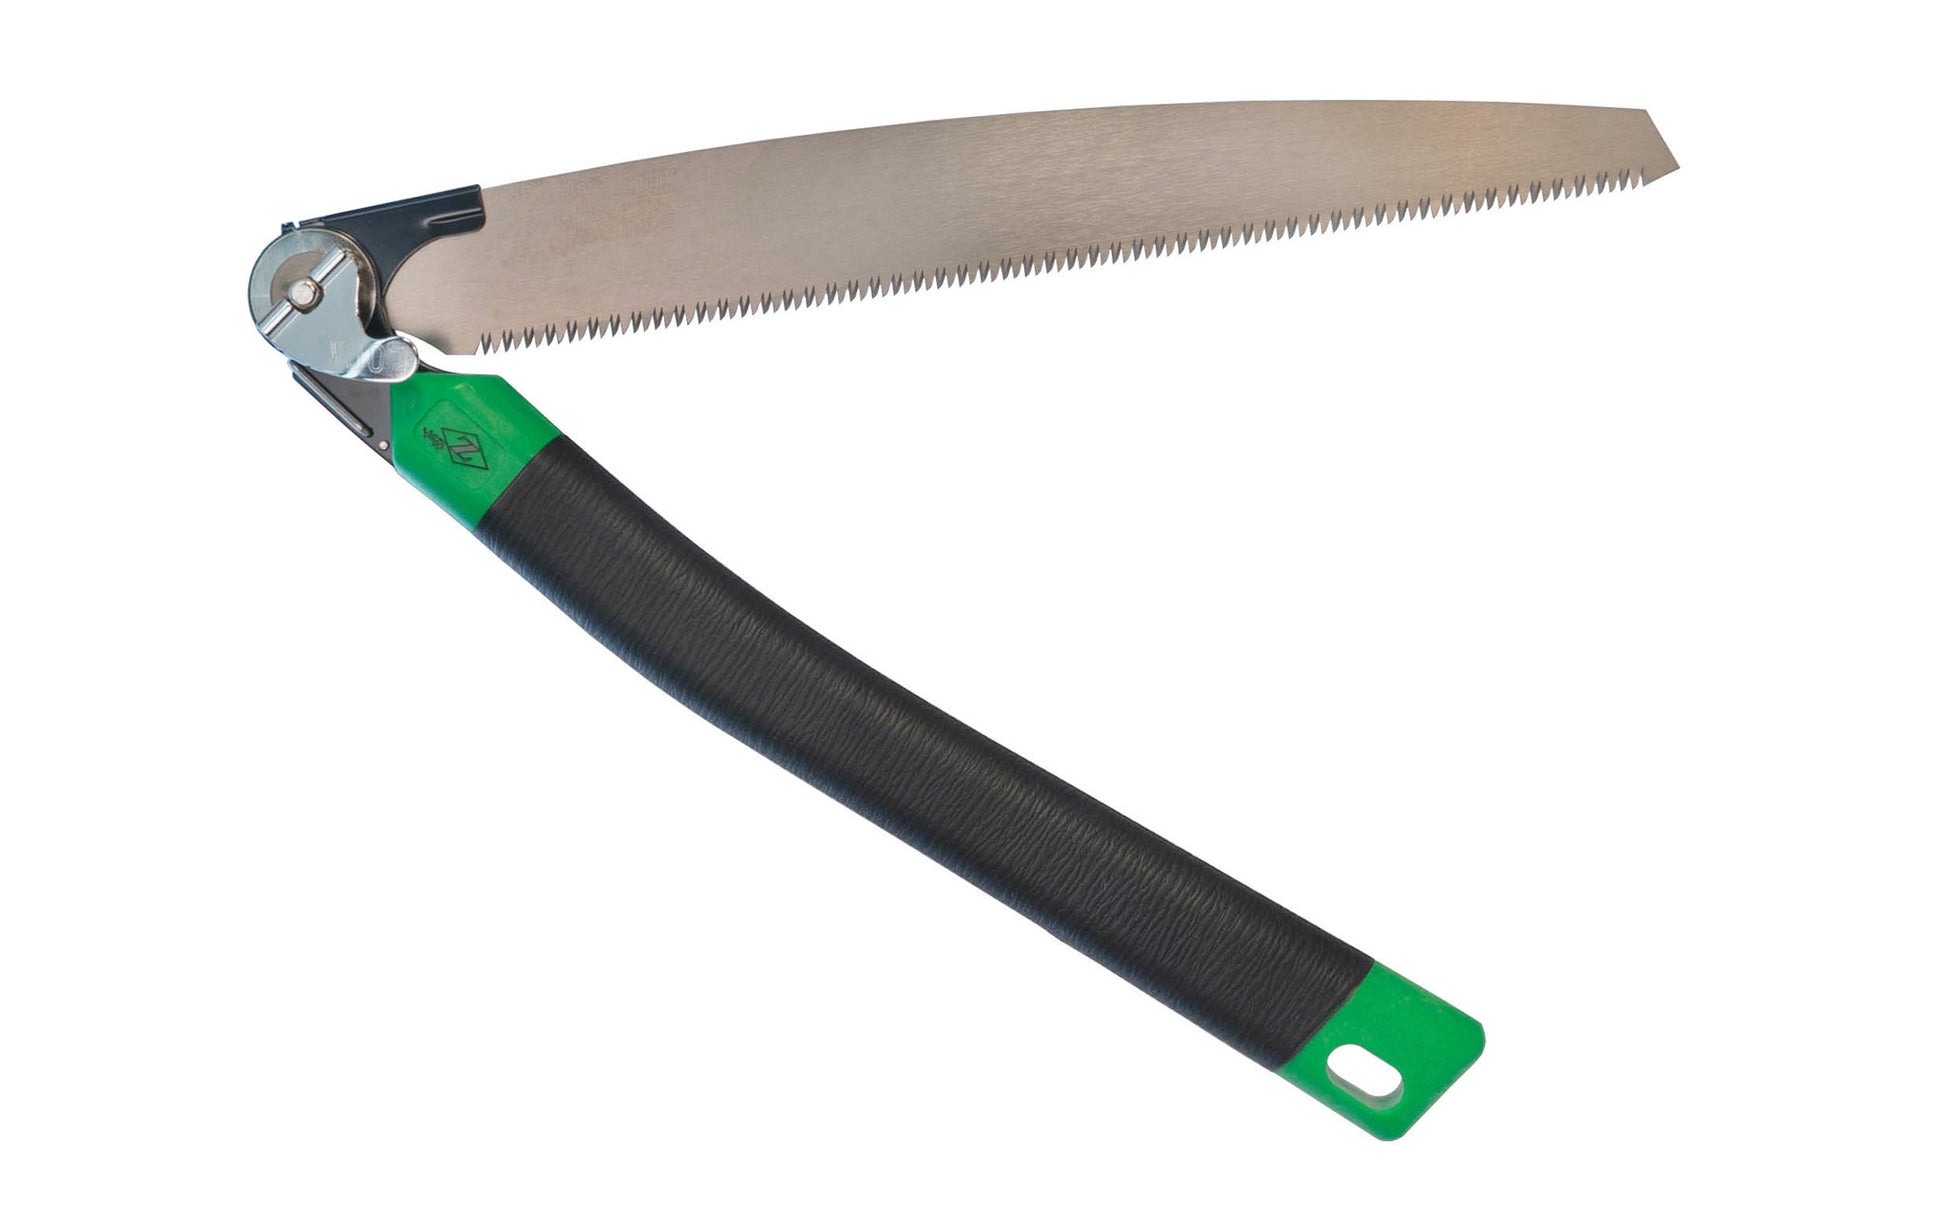 Made in Japan · Crosscut Teeth: 12 TPI ~ Great multi-purpose saw ~ Foldable blade with locking mechanism ~ Overall Saw Length: 23-1/4" ~ 1-7/16" narrow blade - good for tight areas ~ Teflon coated blade helps prevent blade from staining ~ Blade is removable ~ Great for both dry & green woods